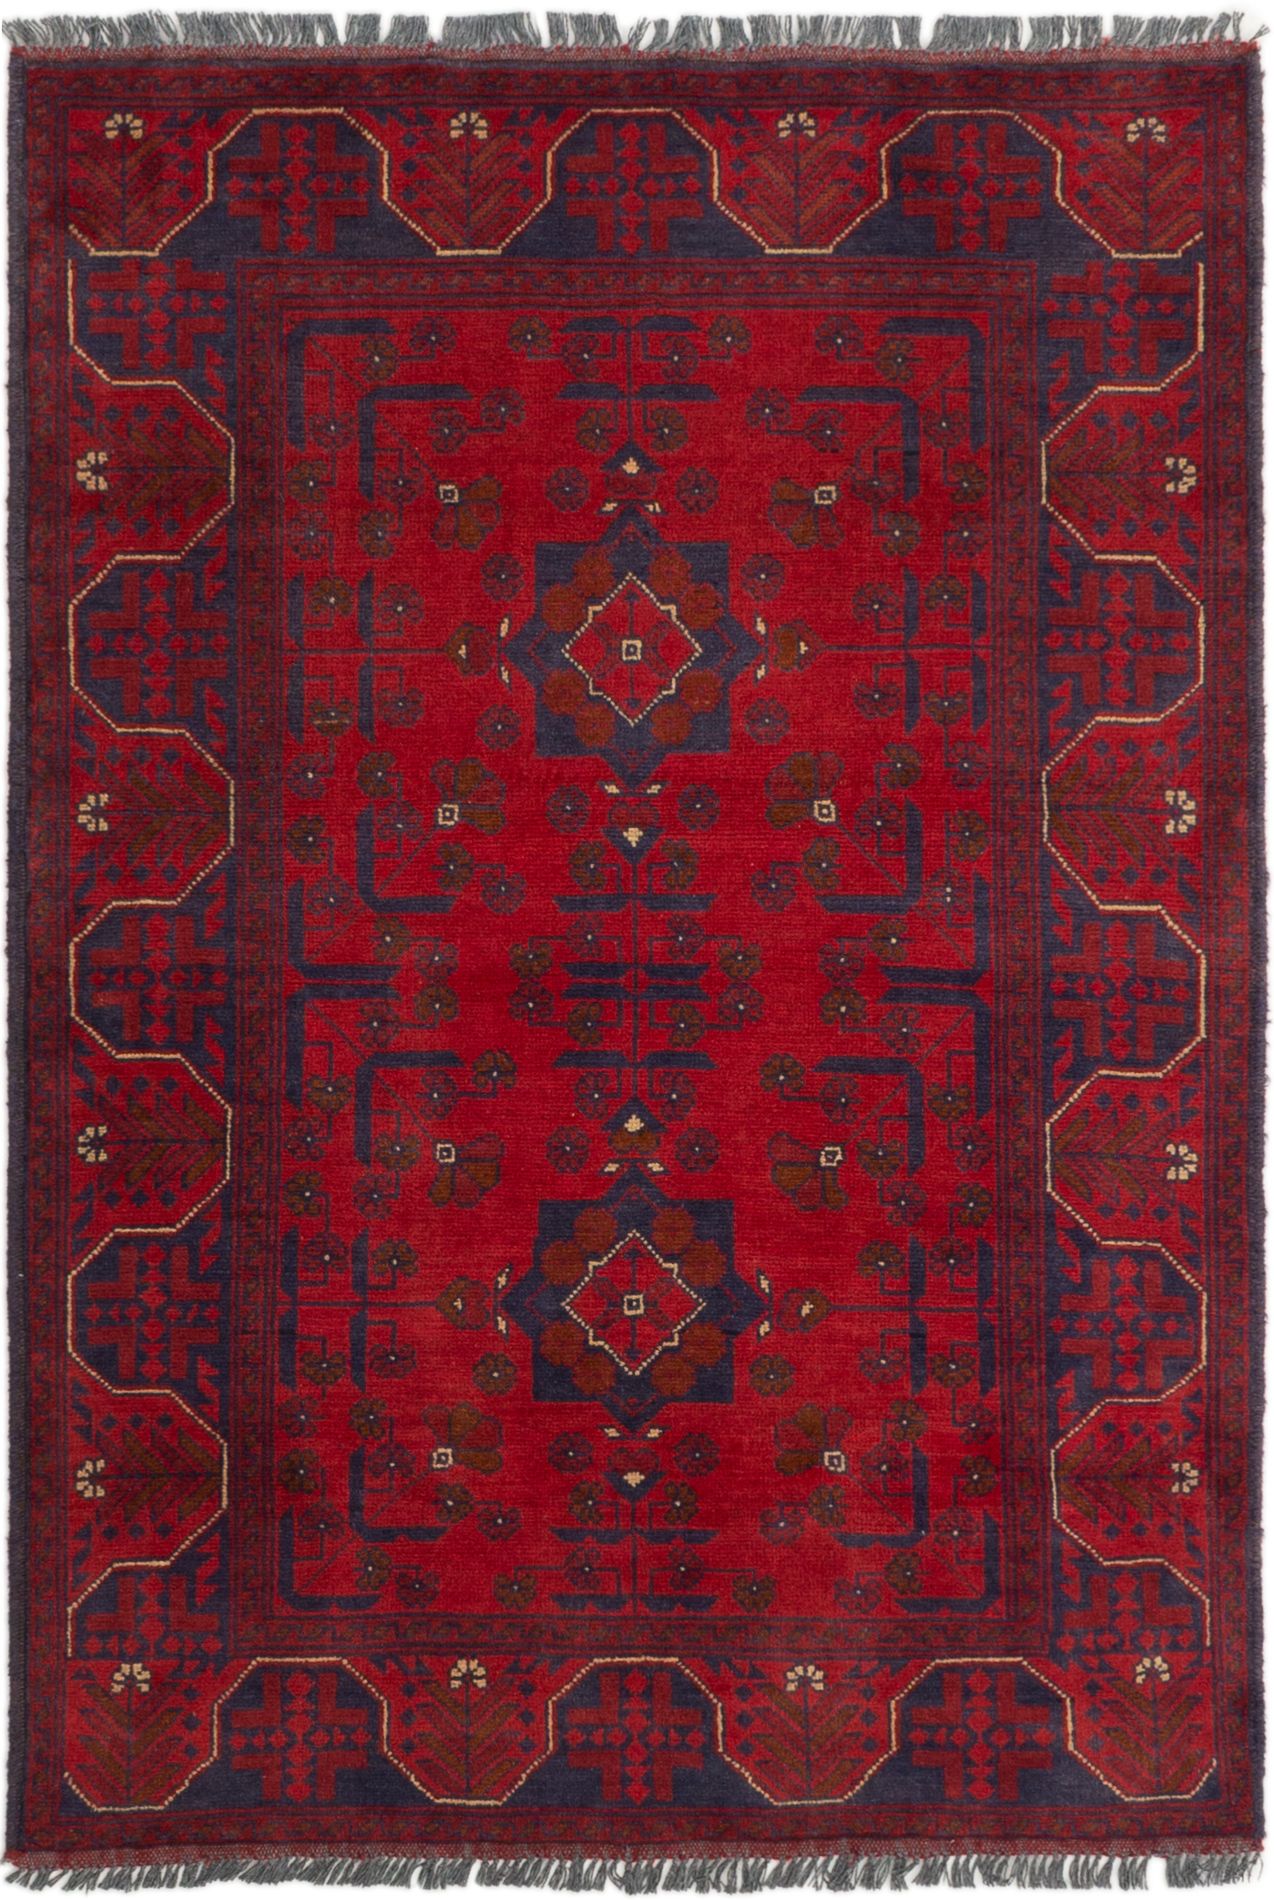 Hand-knotted Finest Khal Mohammadi Red Wool Rug 3'4" x 4'11" (18) Size: 3'4" x 4'11"  